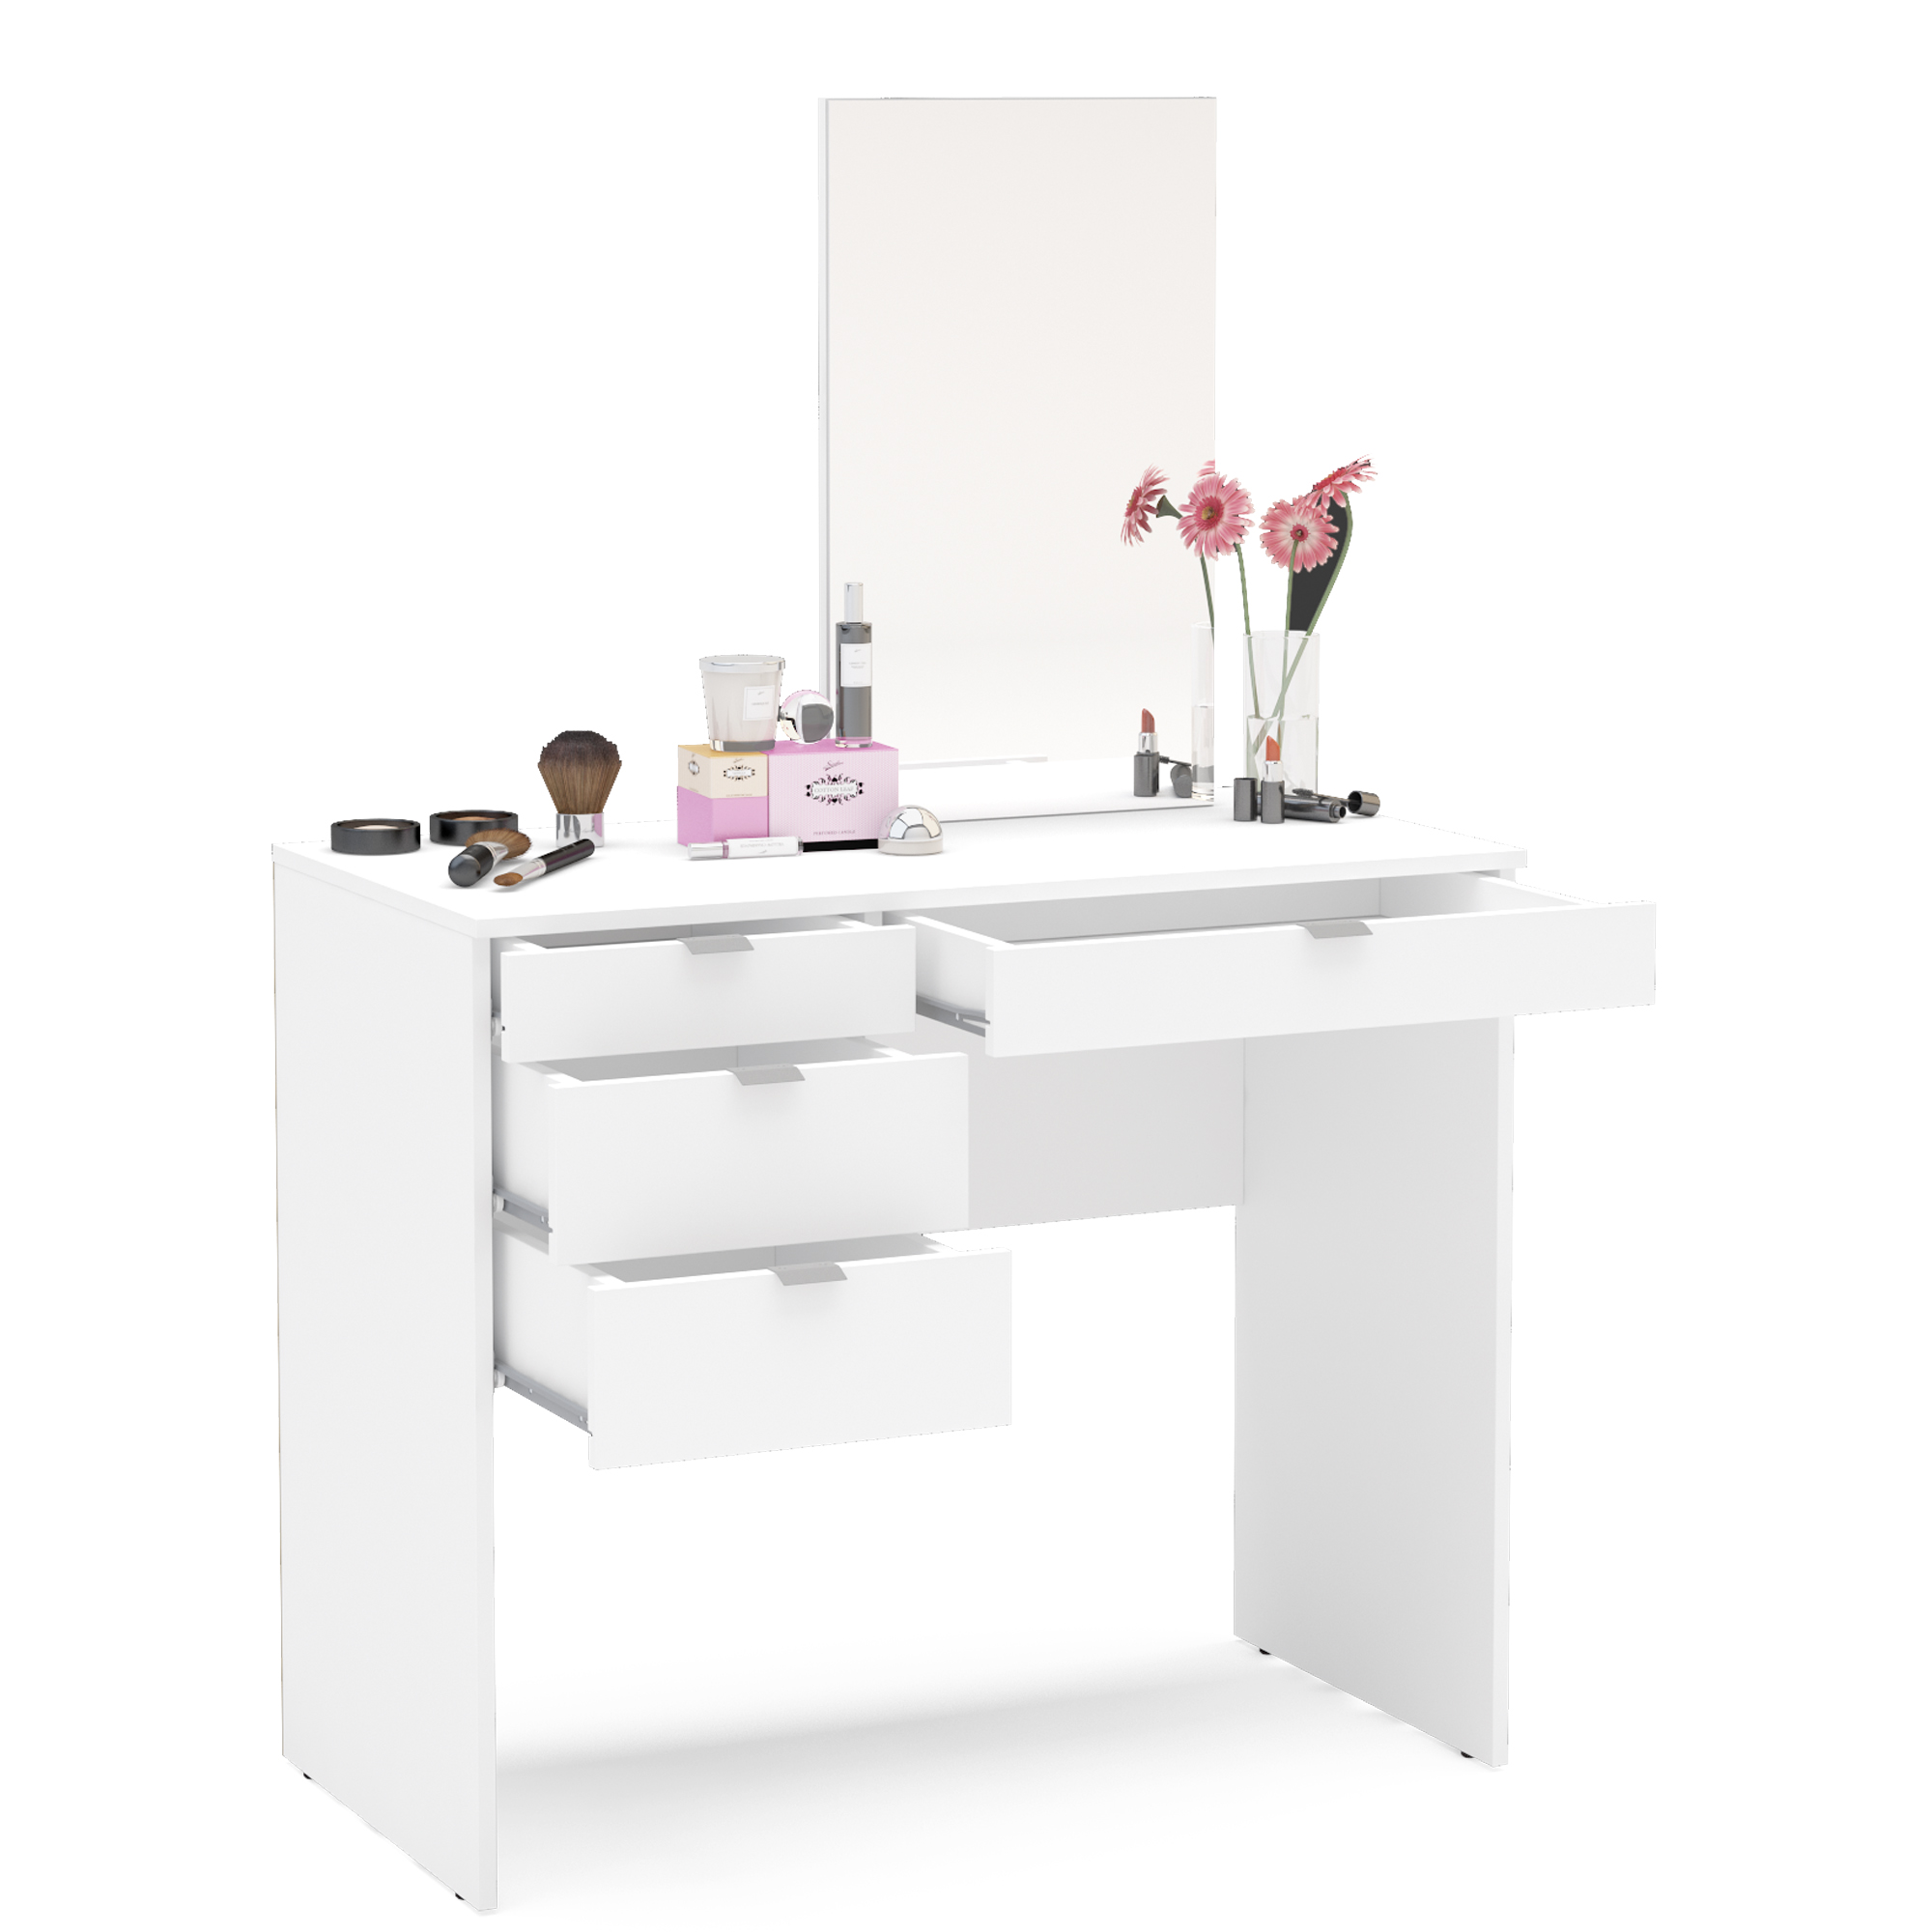 Boahaus Maia Modern Vanity Table, White Finish, for Bedroom - image 3 of 9